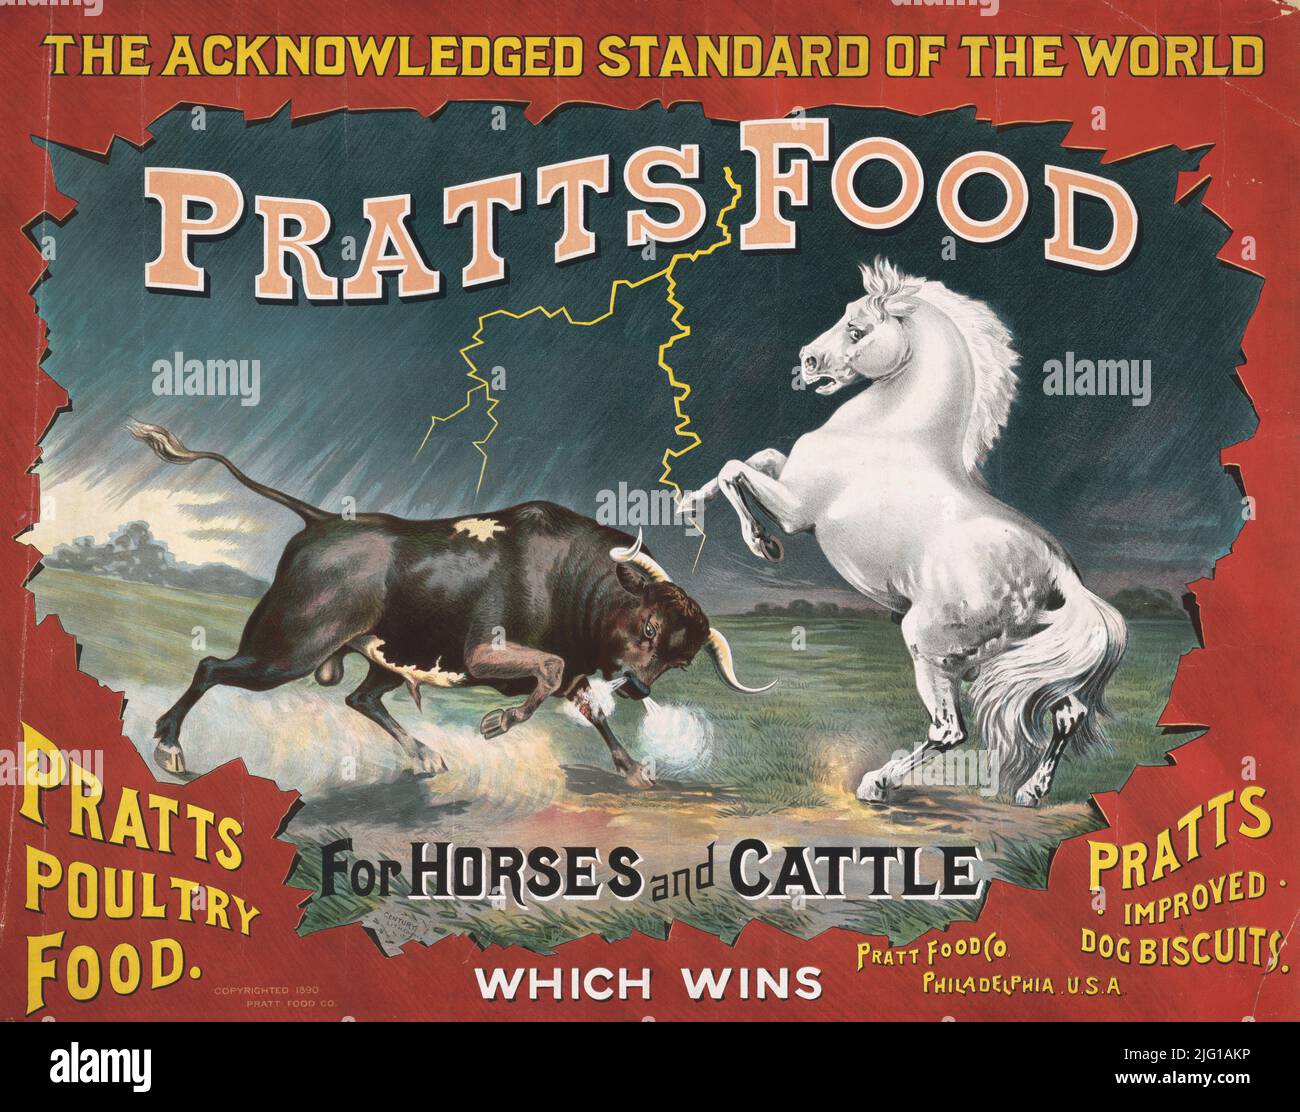 1890 ad for Pratts Food for horse and cattle, pultry food, dog biscuits, Philadelphia, Pennsylvania. Lithograph by Century Lith Co Stock Photo